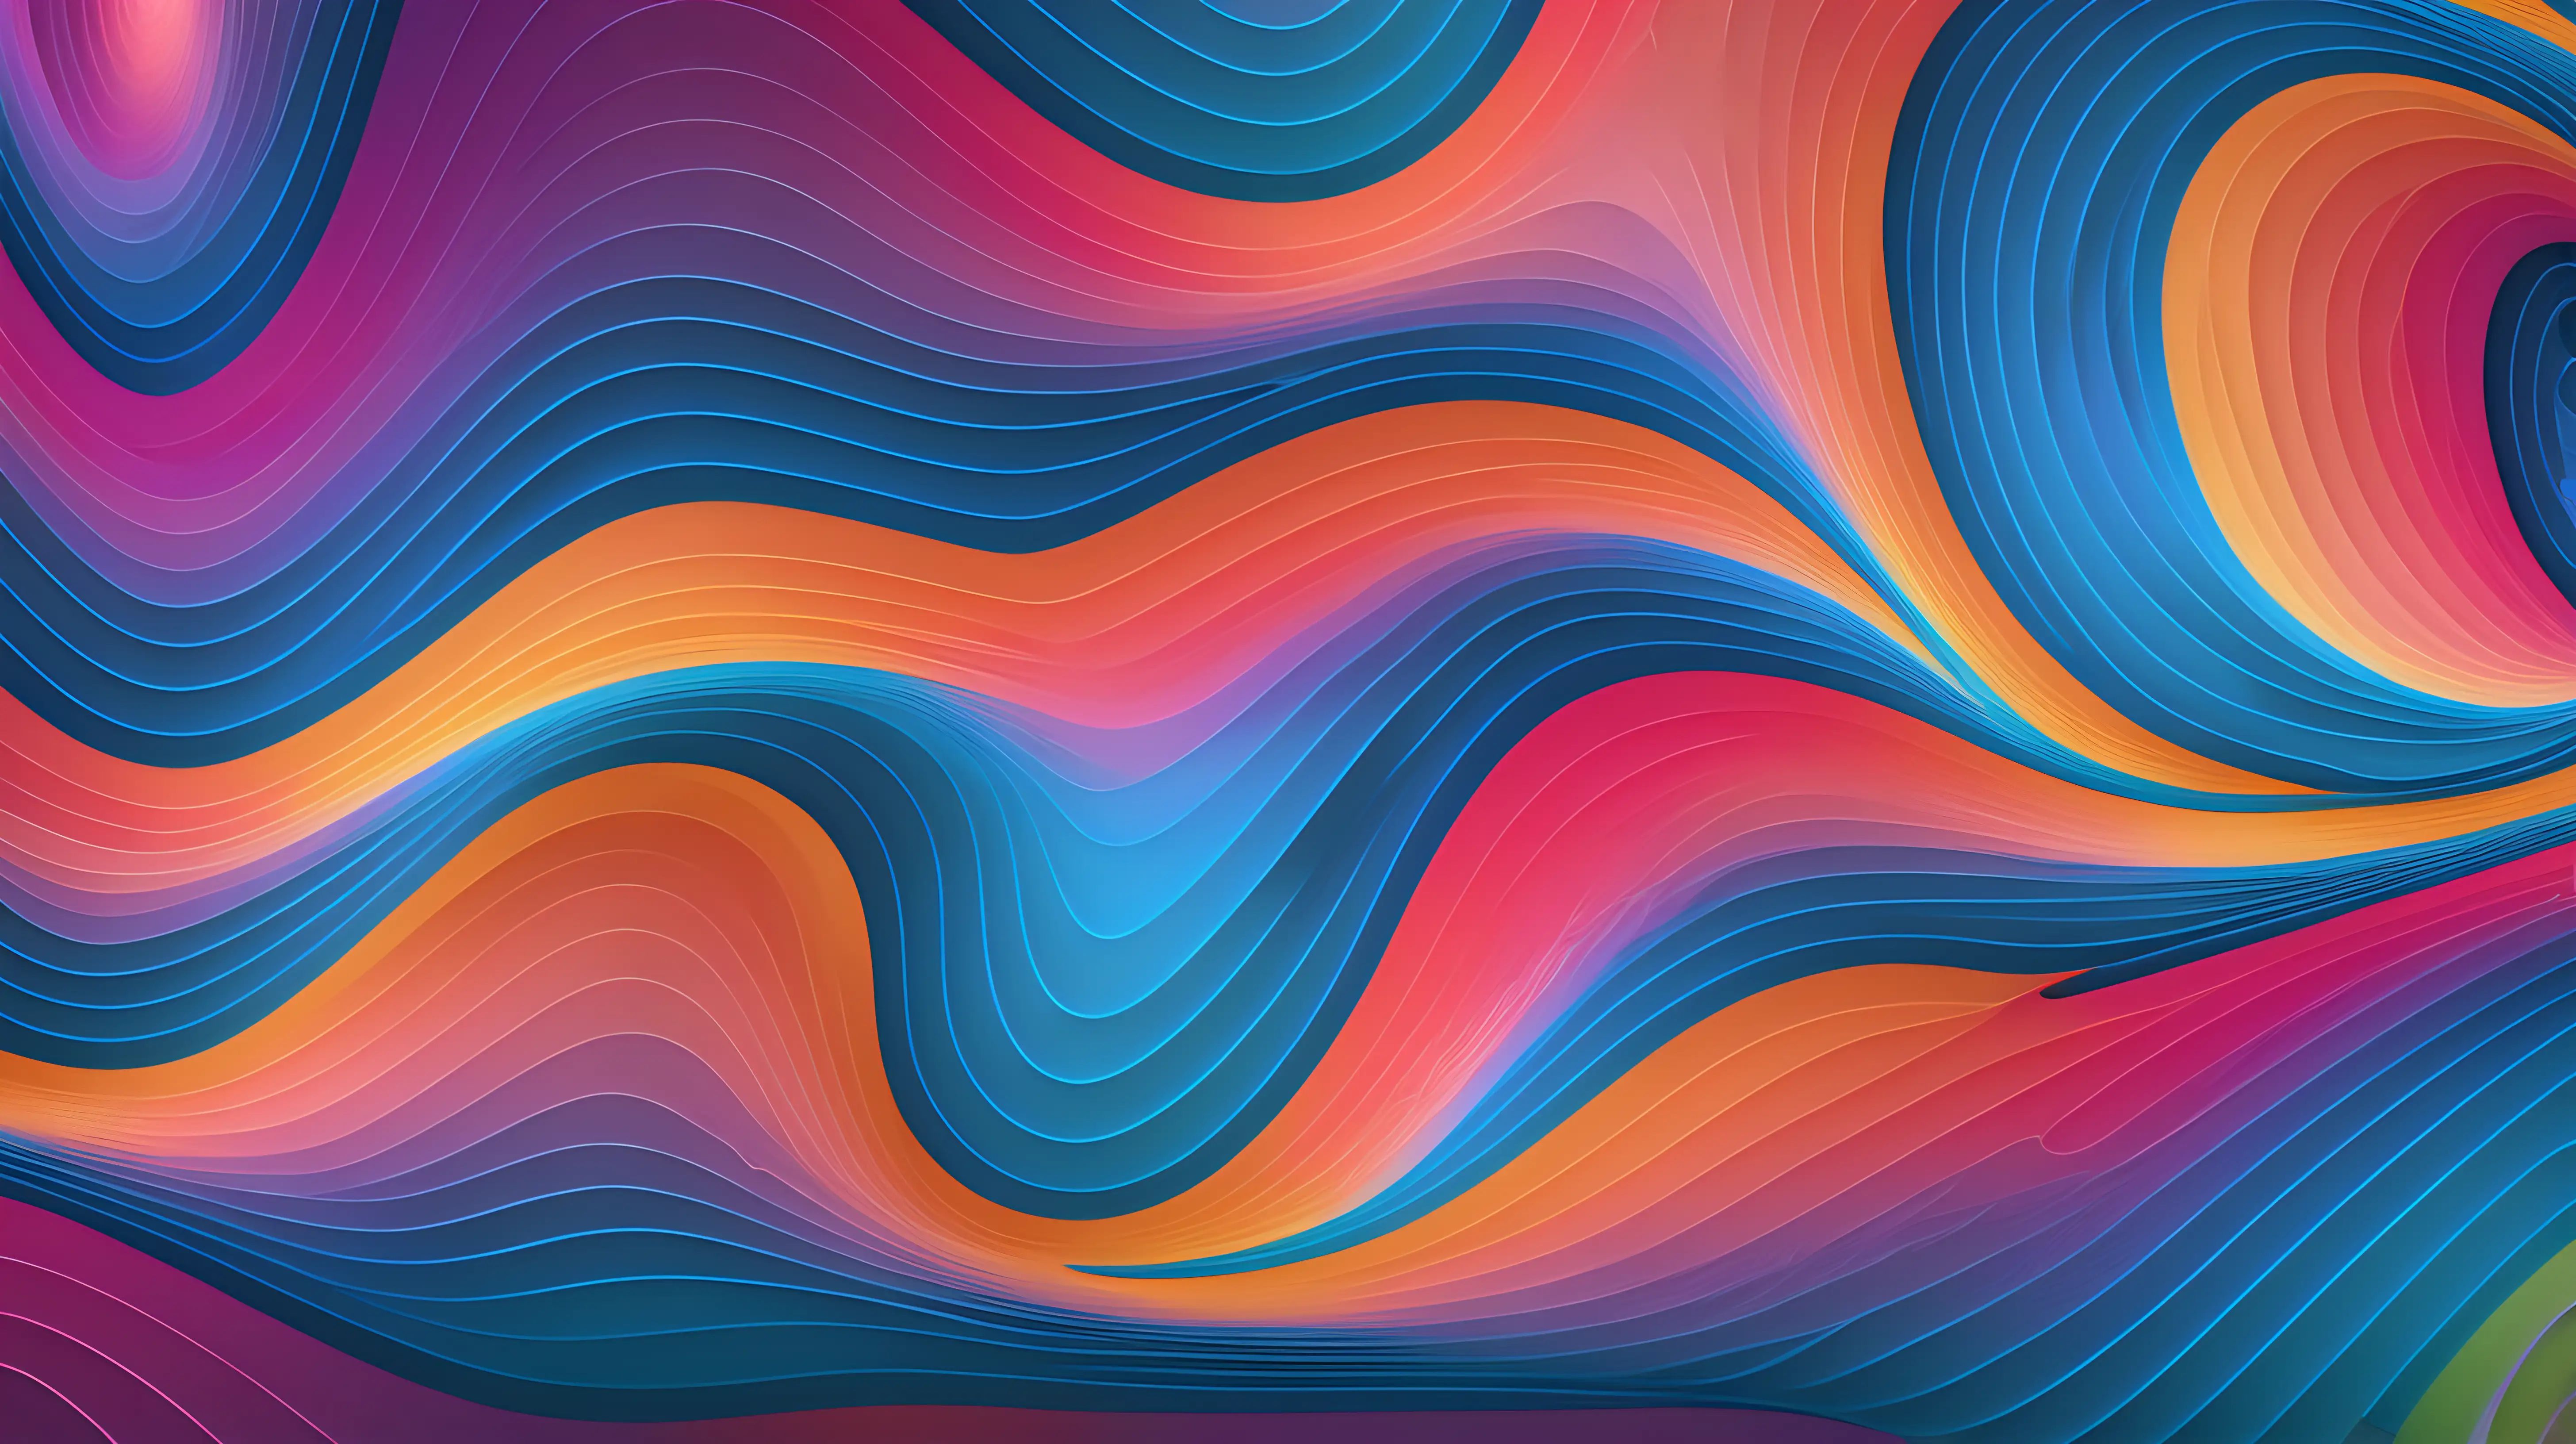 Create a background with overlapping waves of color, giving the illusion of ripples in space-time, showcasing the concept of dimensions intertwining.